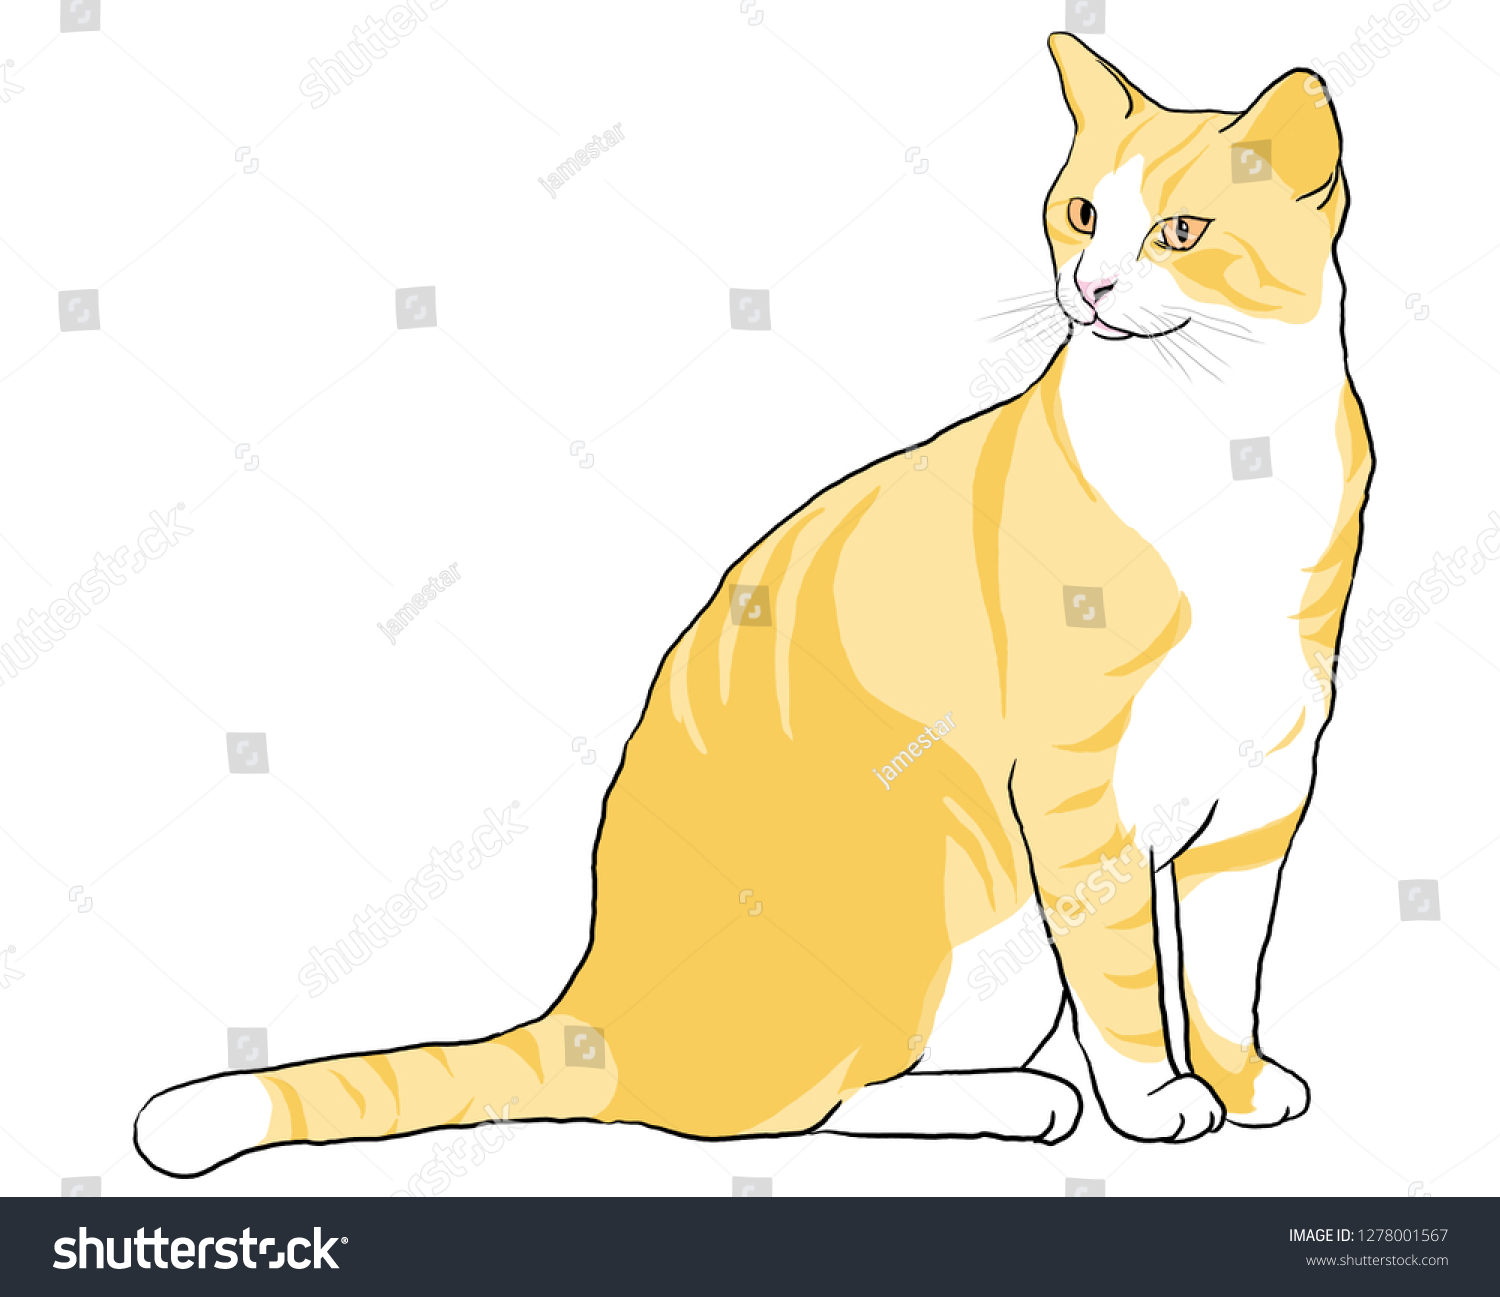 domestic cats with tiger stripes clipart